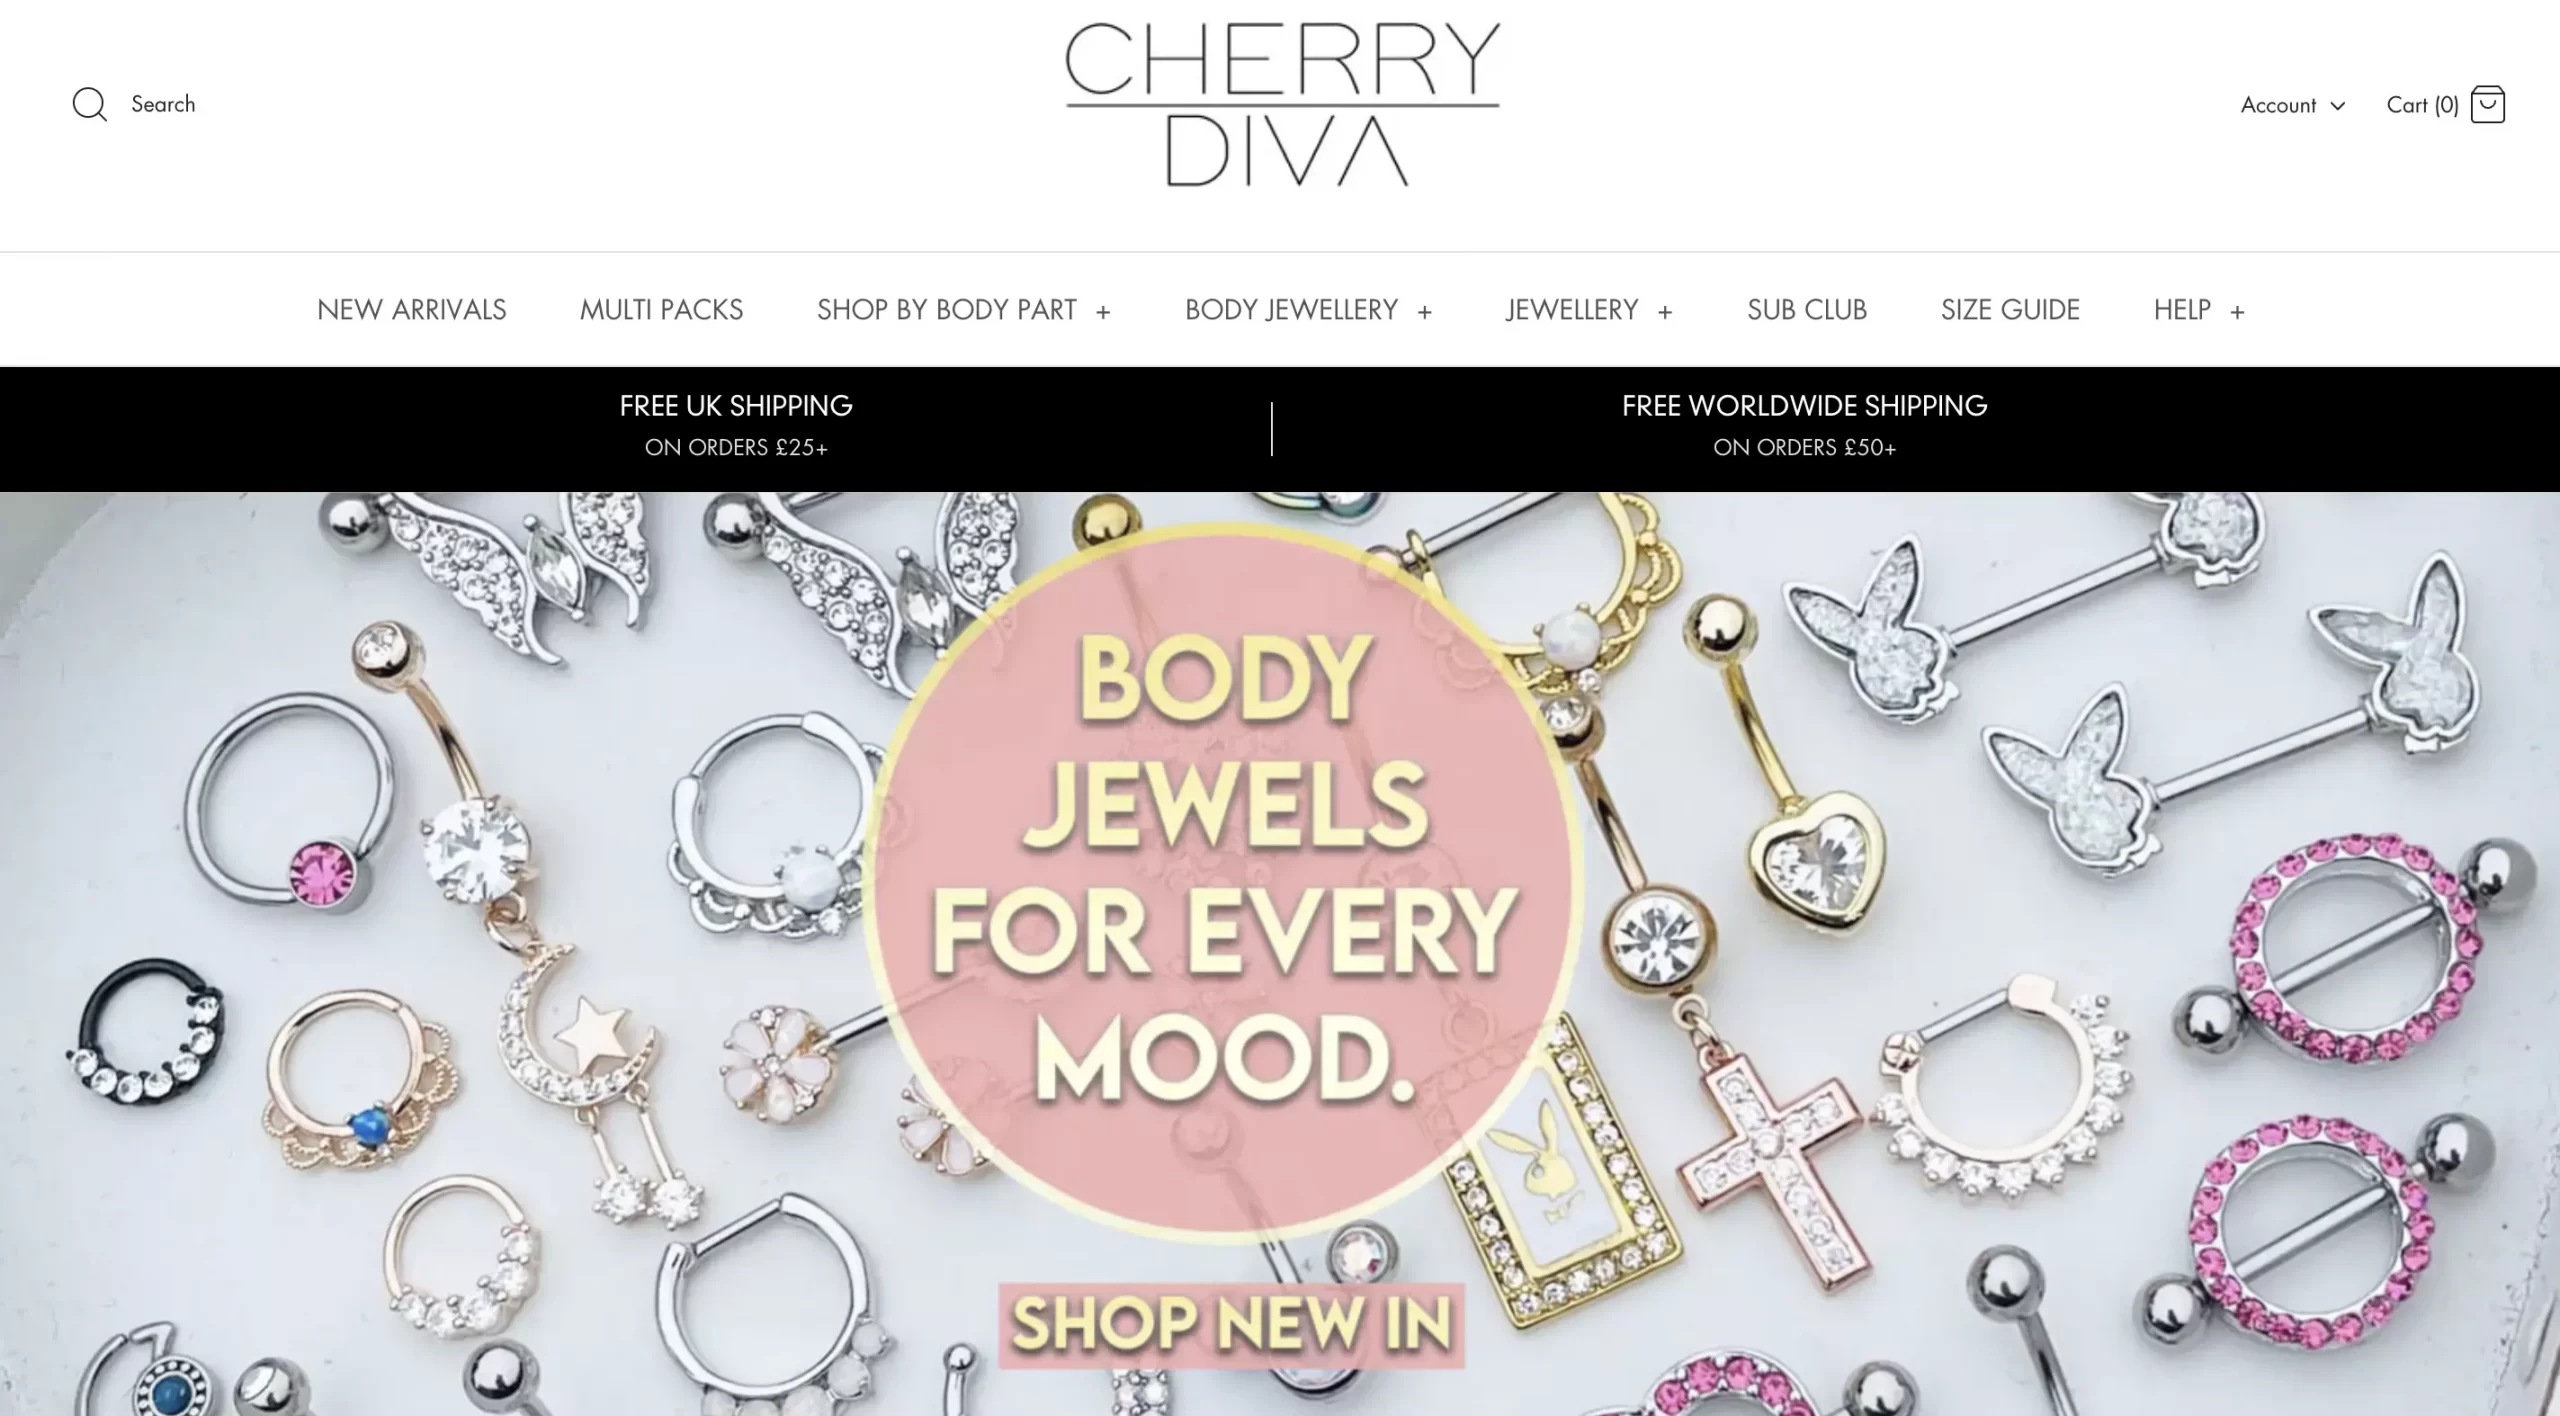 Best Online Jewelry Stores: Our Top Recommendations